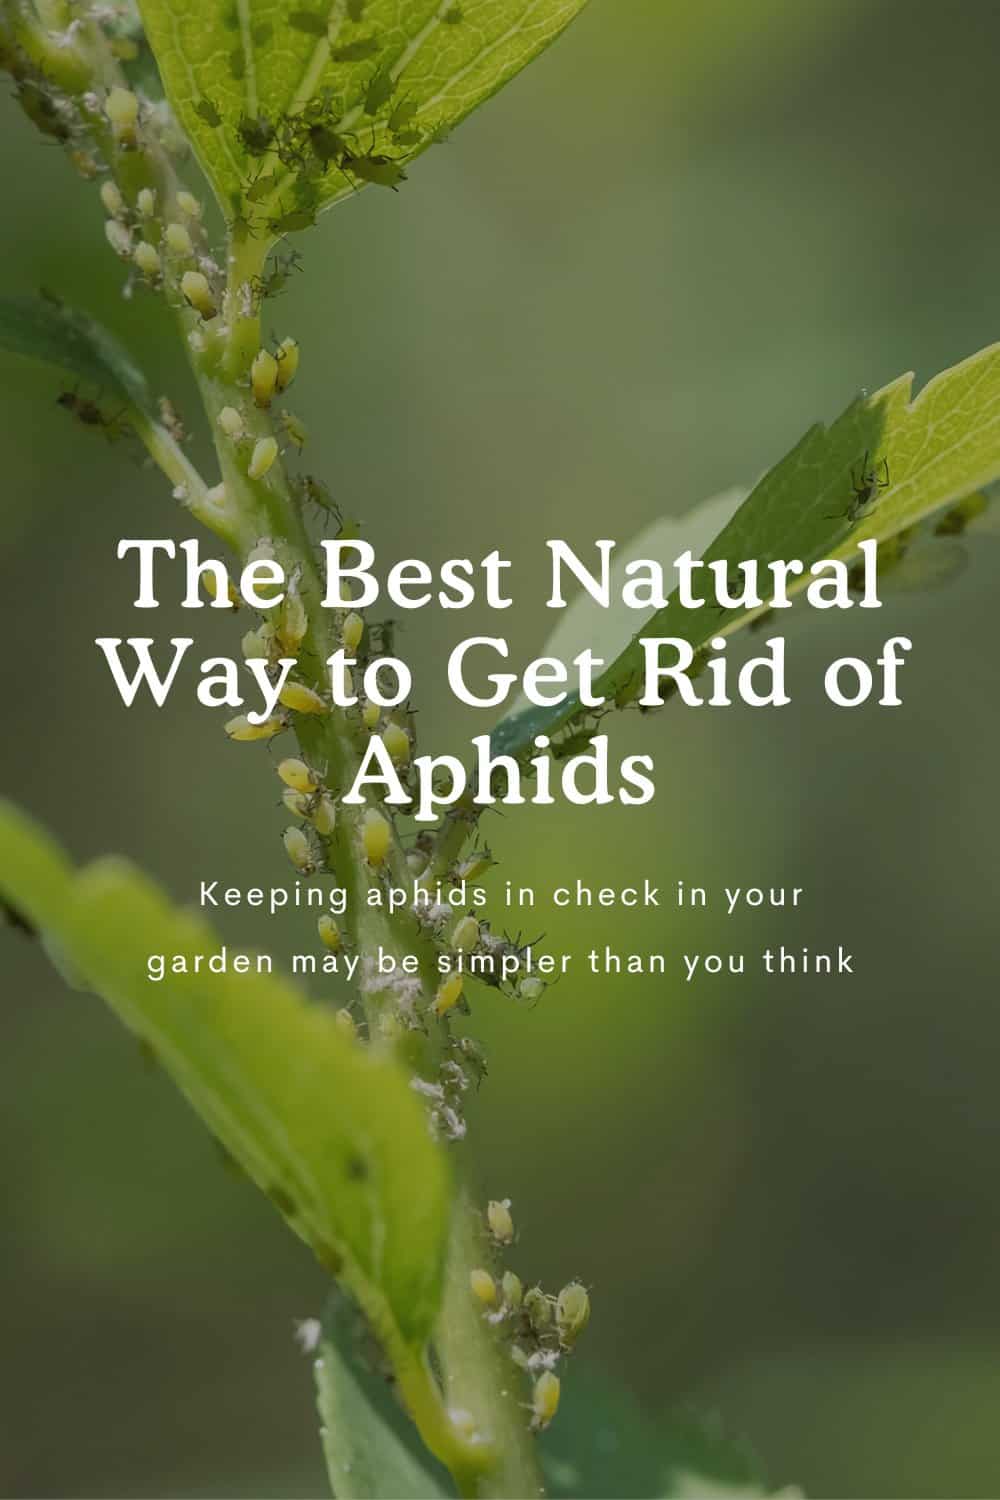 The best natural way to get rid of aphids